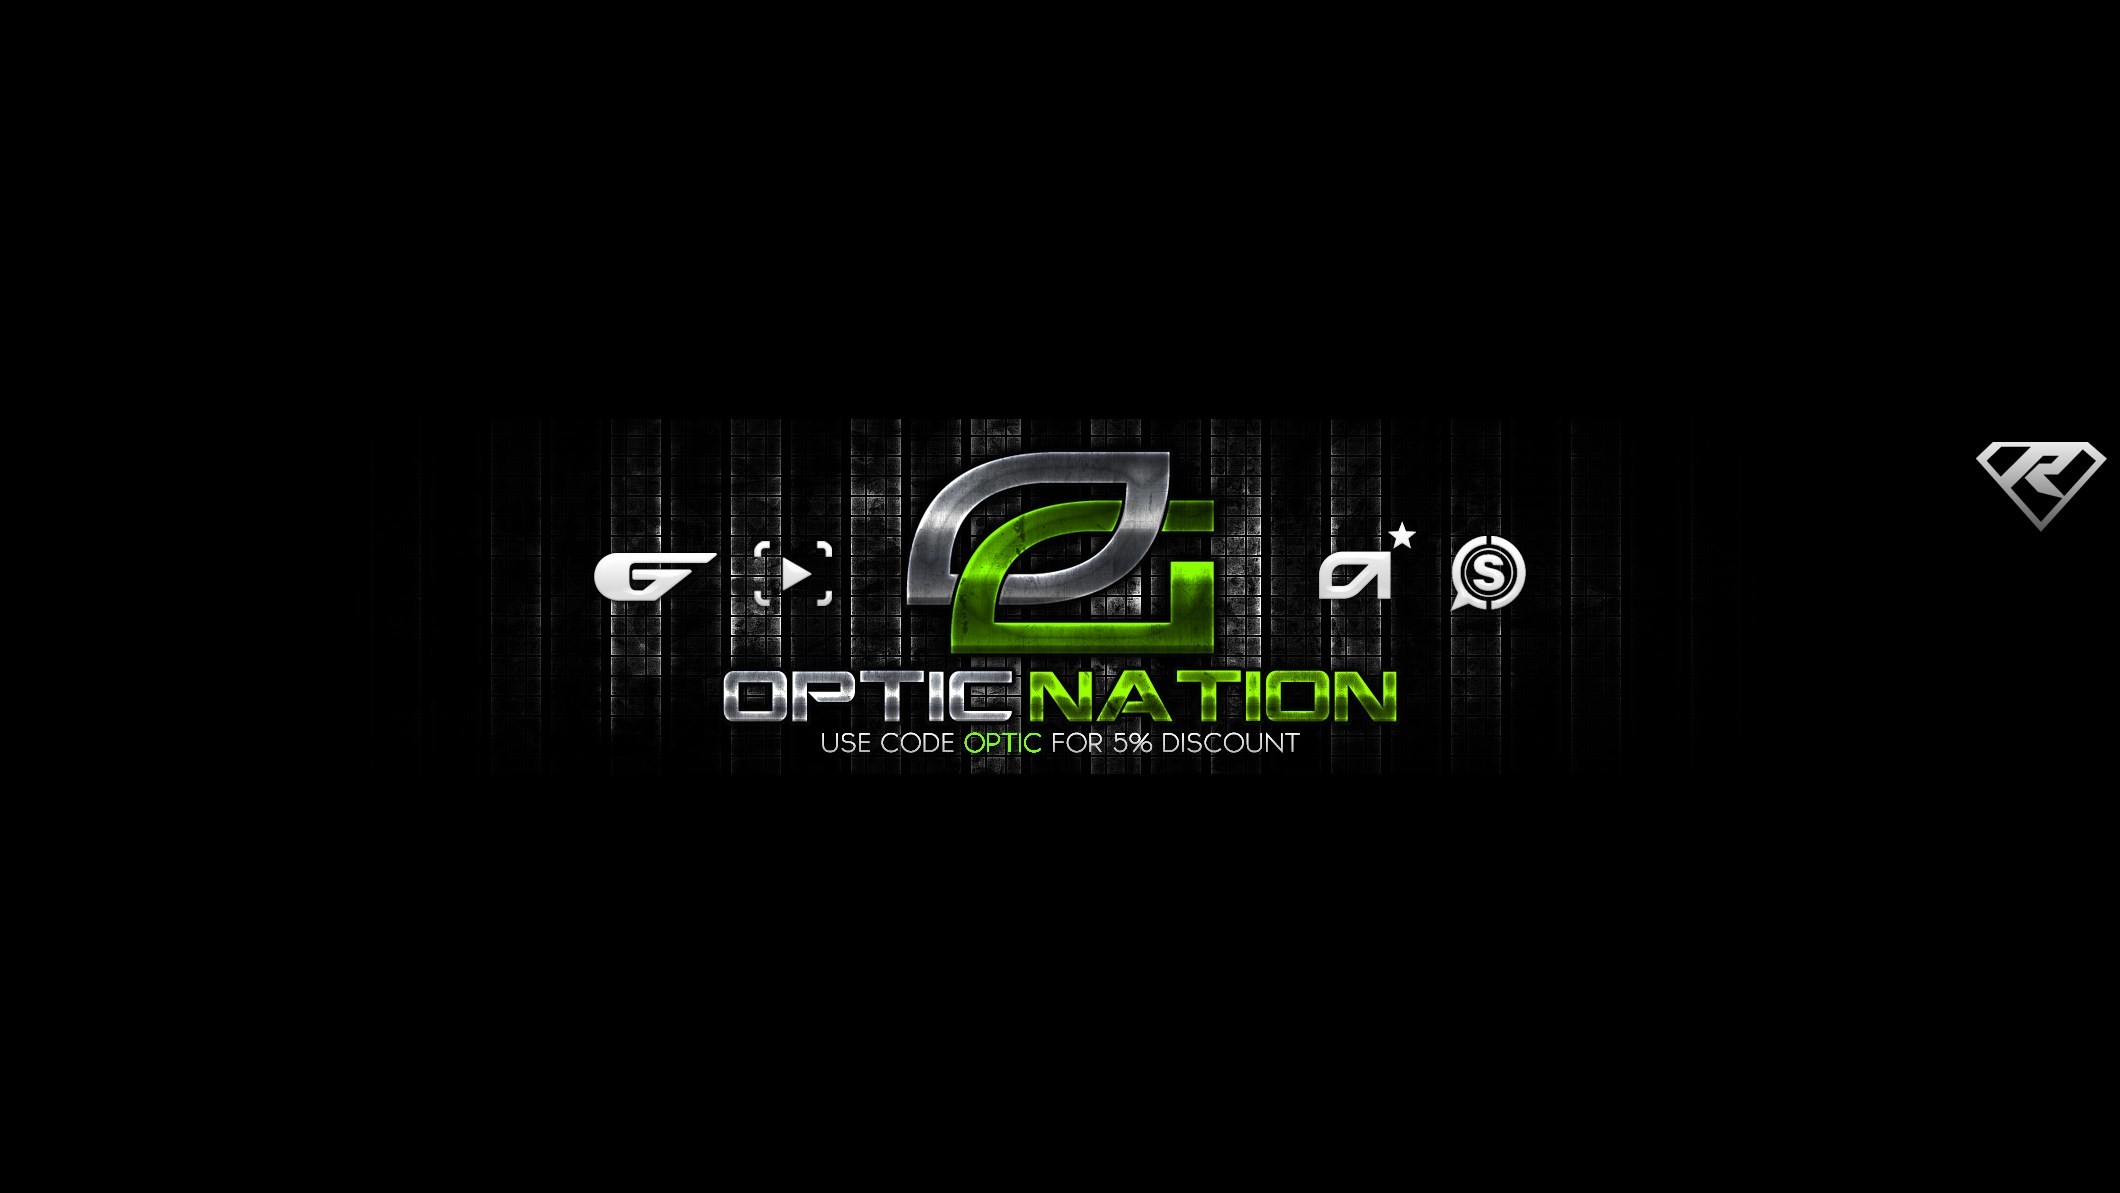 OpTic Aaron on Twitter Noticed a dry supply of OpTic desktop wallpapers  Here is a nice simple one in 4K httpstcovX6Flh4SYI  httpstcoaQGiy0tUei  Twitter